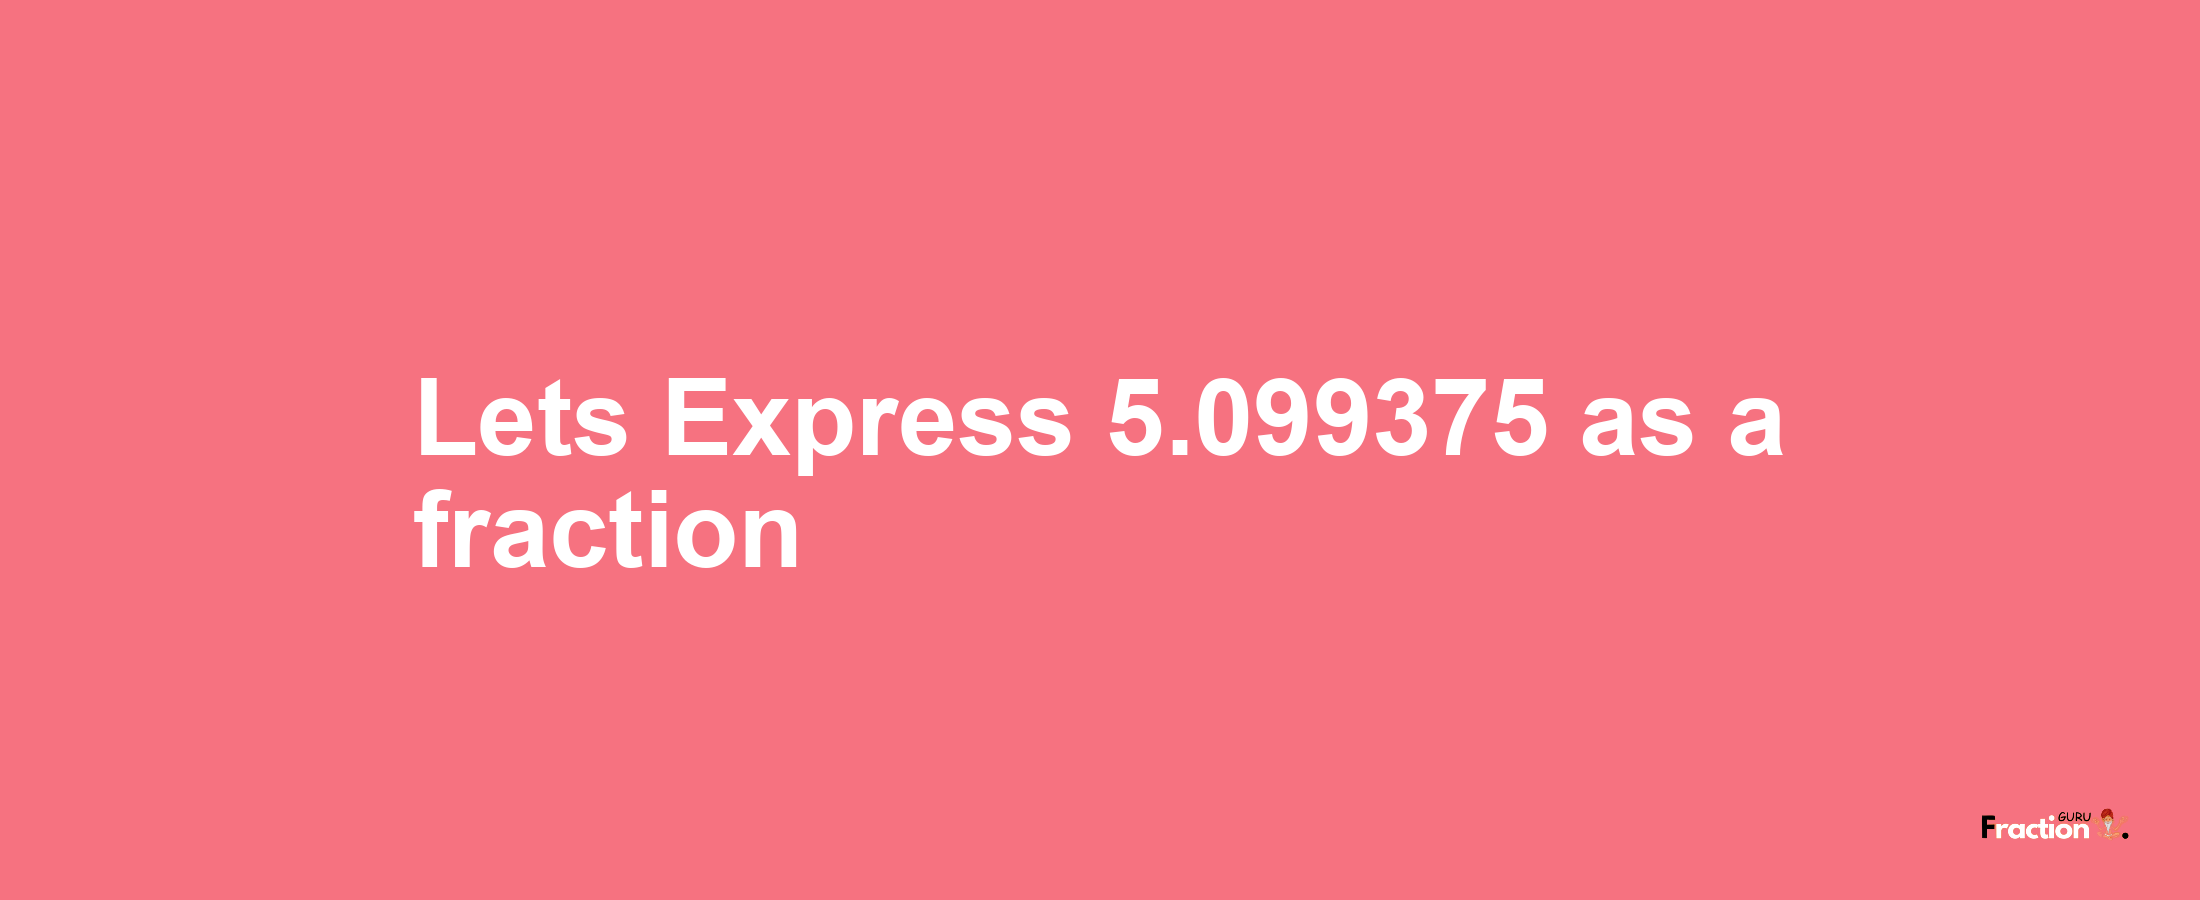 Lets Express 5.099375 as afraction